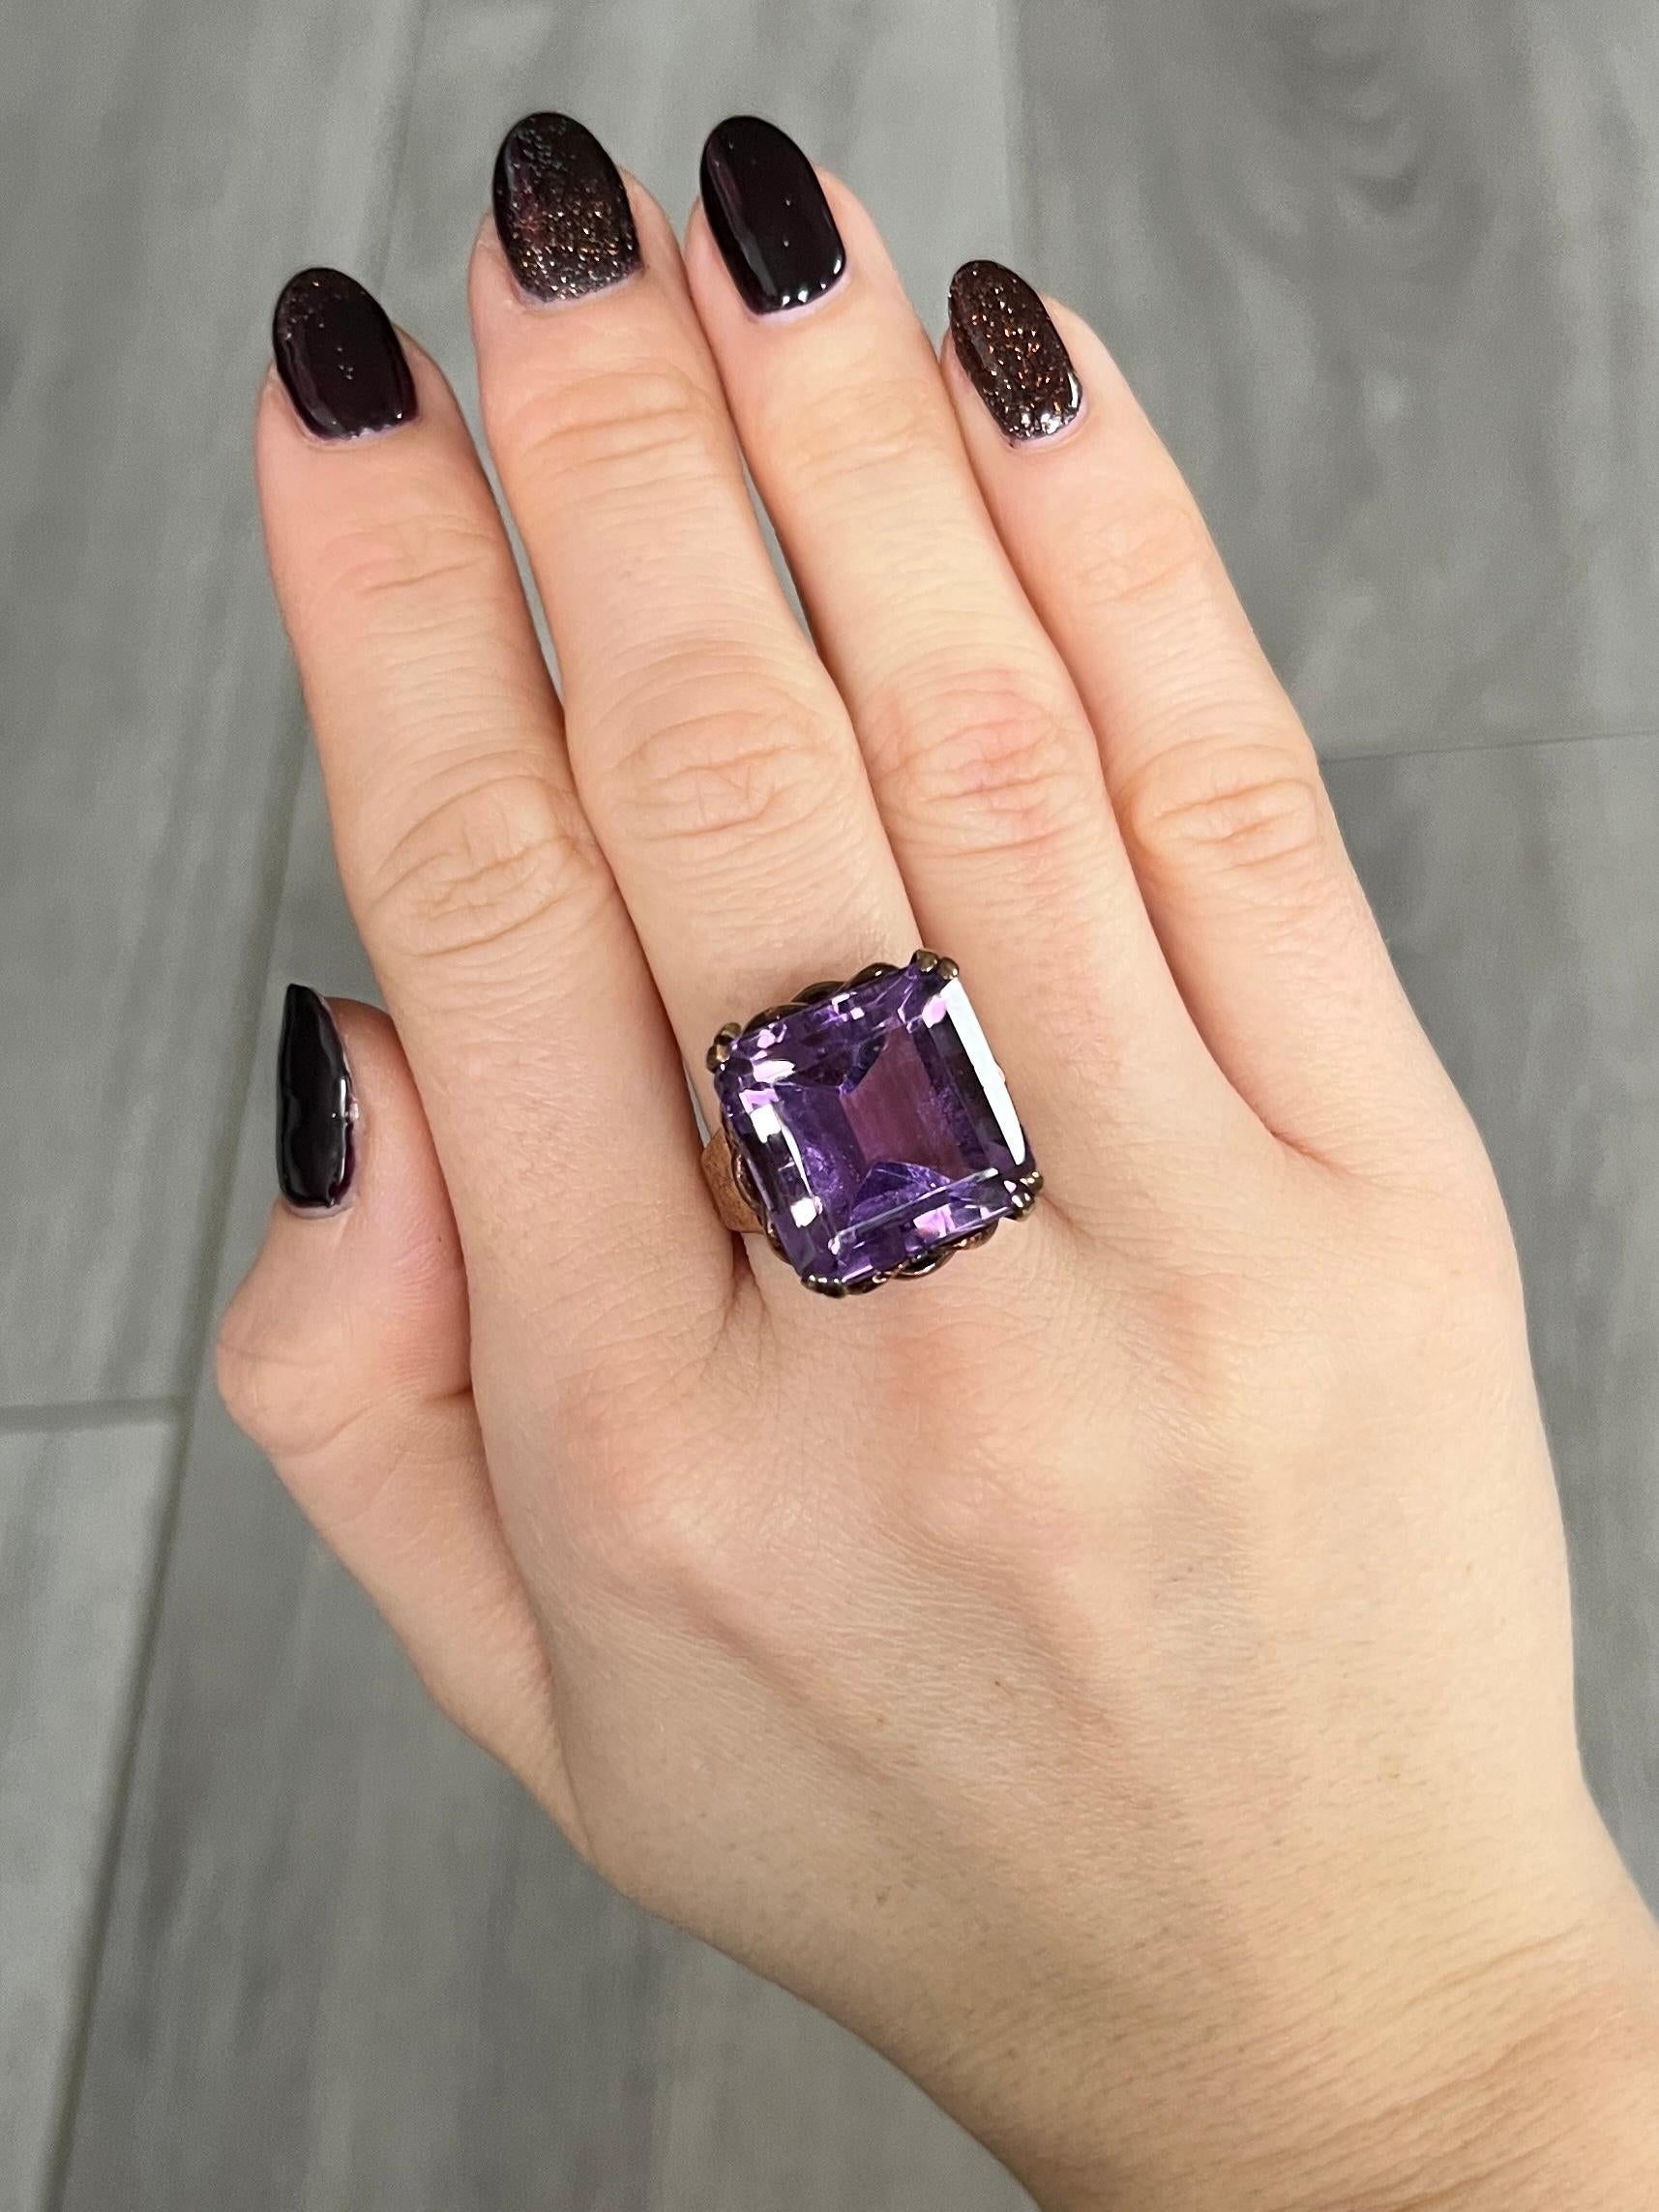 Vintage Amethyst and 9 Carat Gold Cocktail Ring In Good Condition For Sale In Chipping Campden, GB